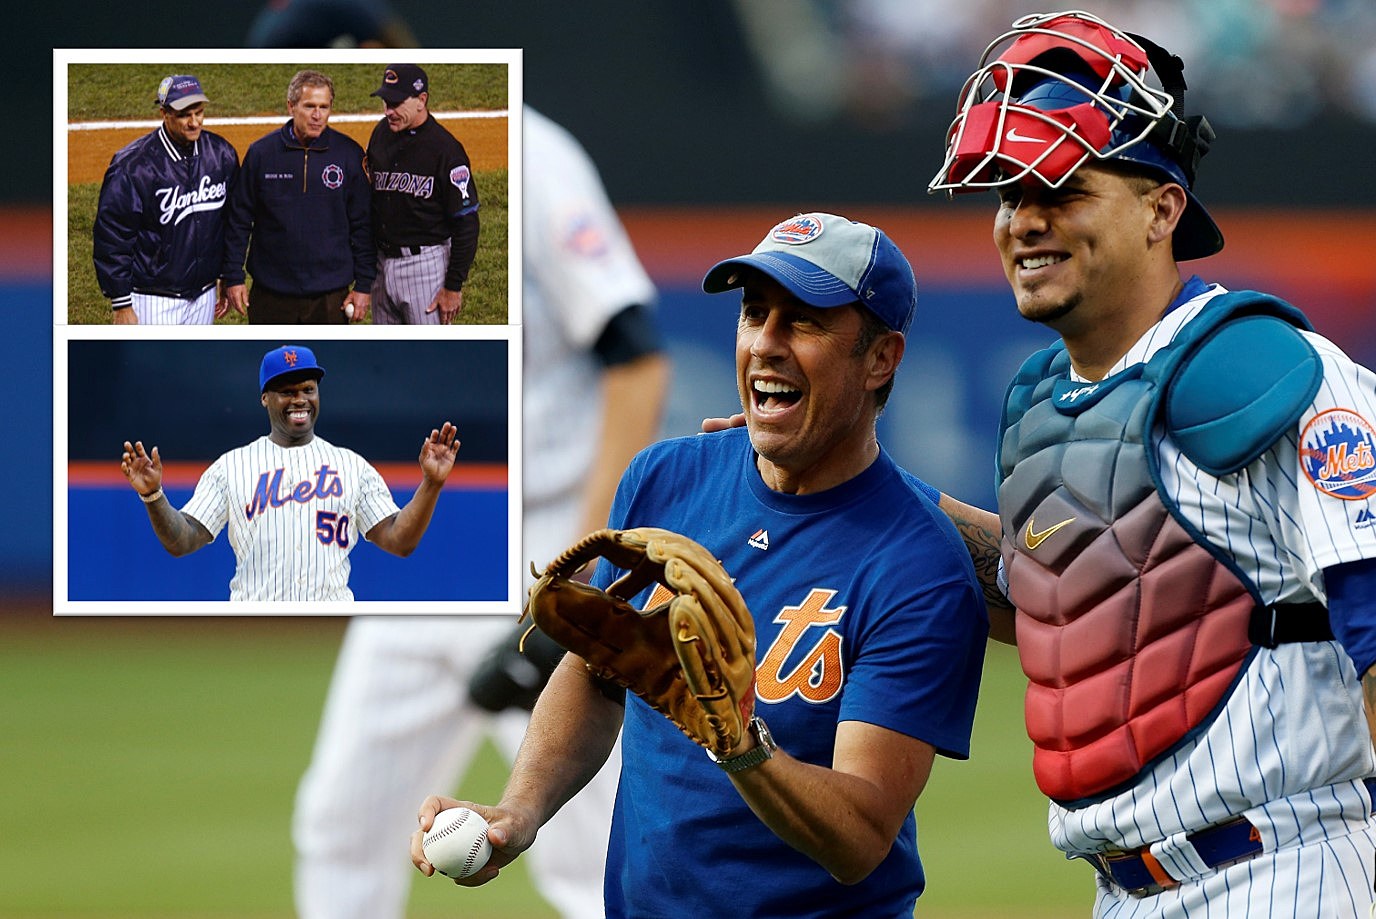 Ooh, my arm! Yankees and Mets caught up in thick of injury